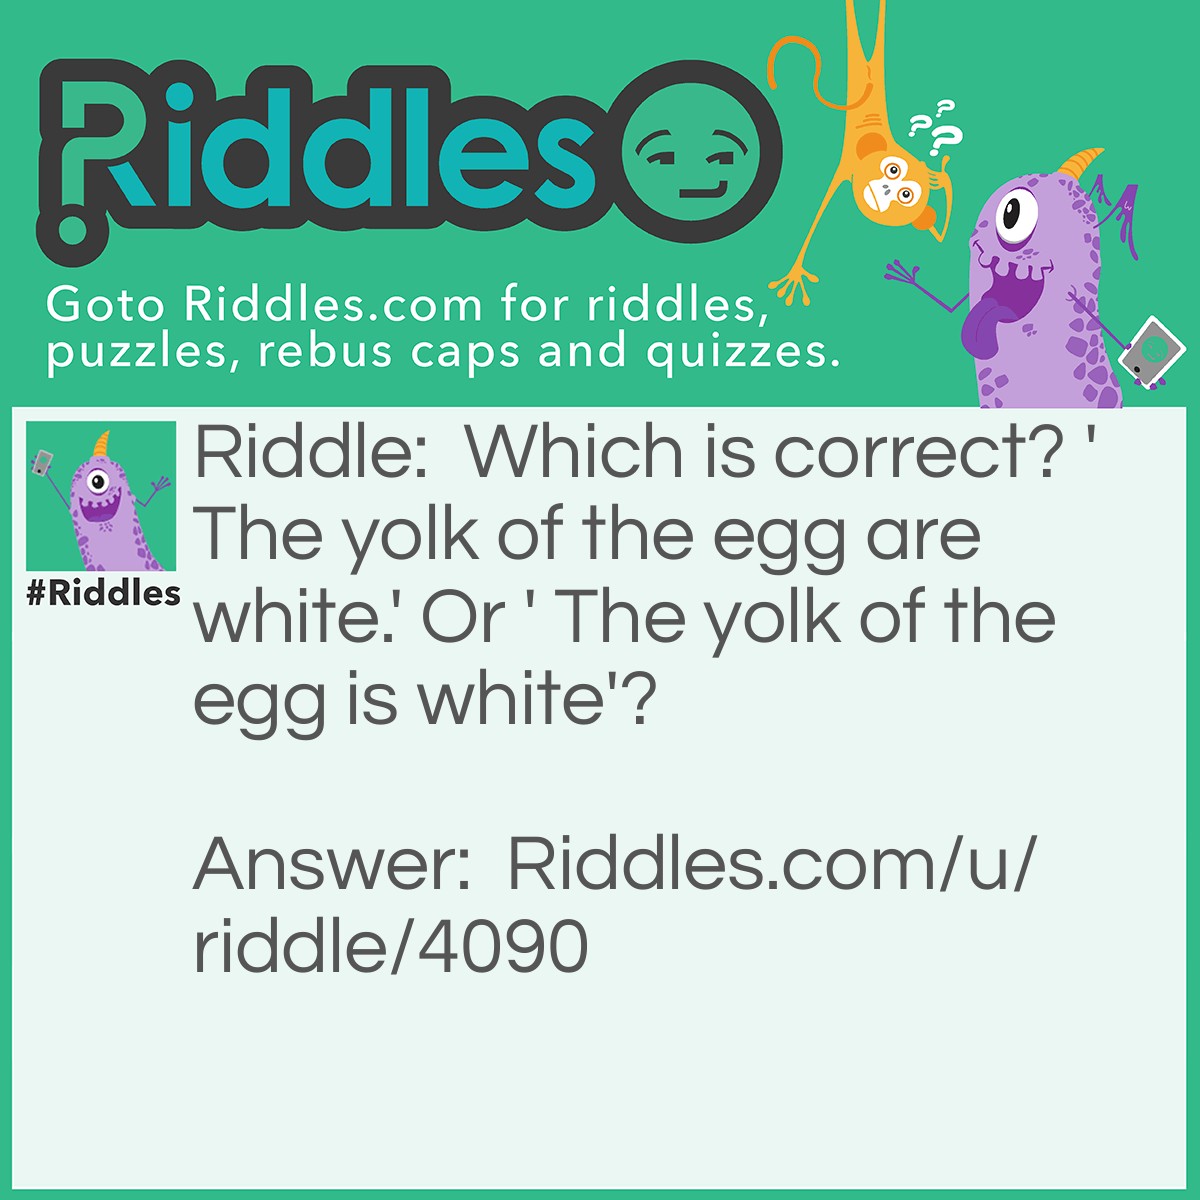 Riddle: Which is correct? 'The yolk of the egg are white.' Or ' The yolk of the egg is white'? Answer: Neither- the yolk of an egg is yellow.